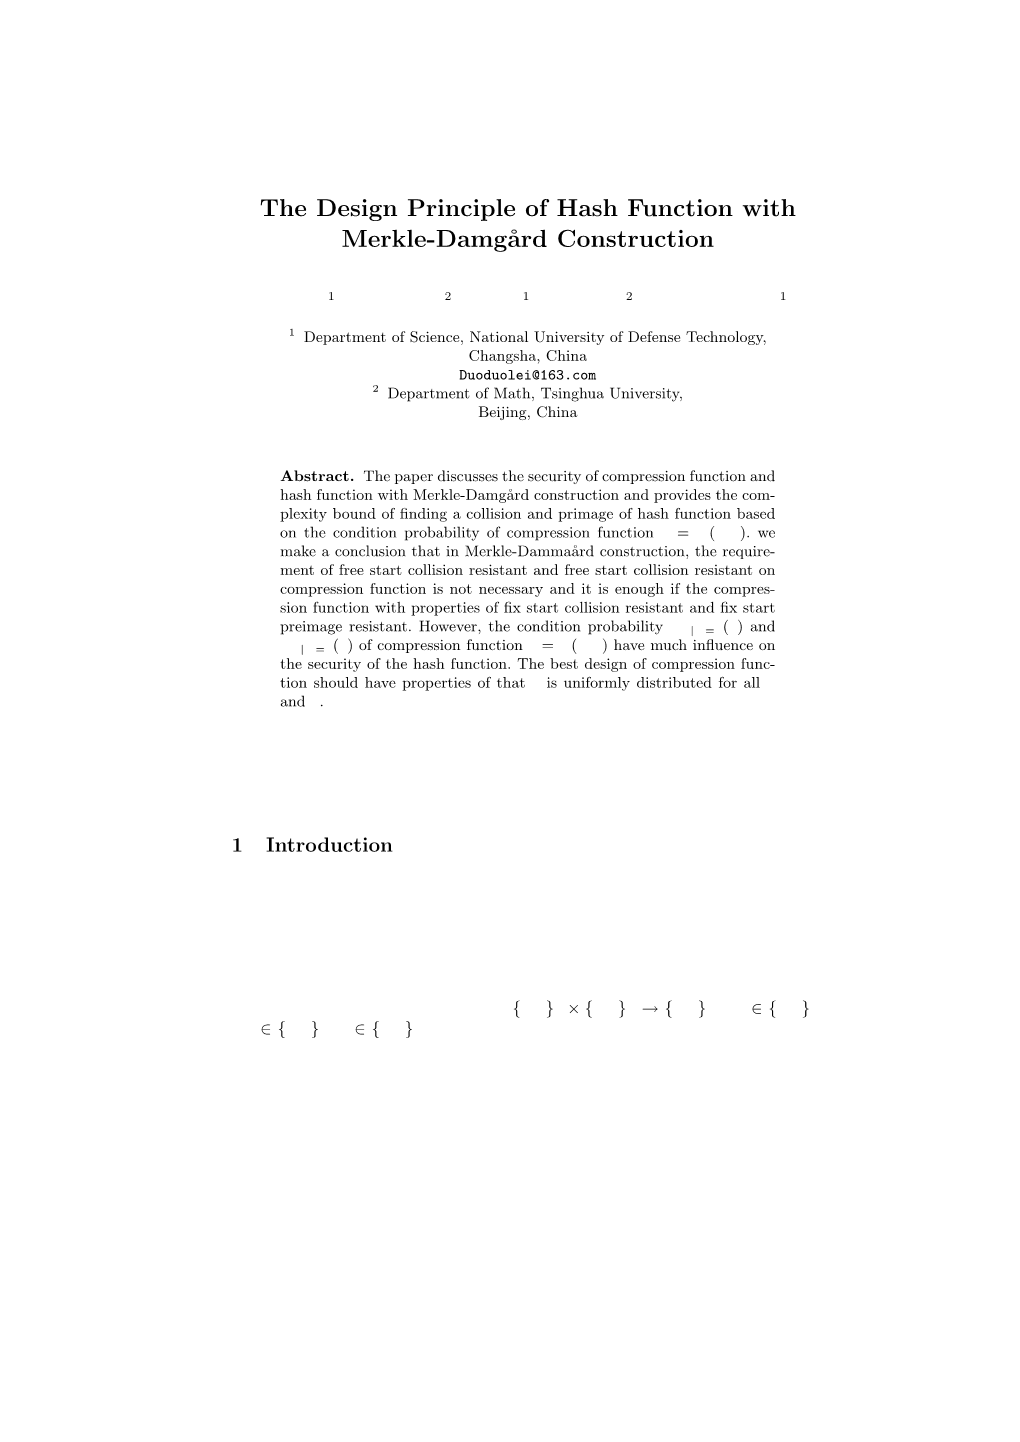 The Design Principle of Hash Function with Merkle-Damgård Construction